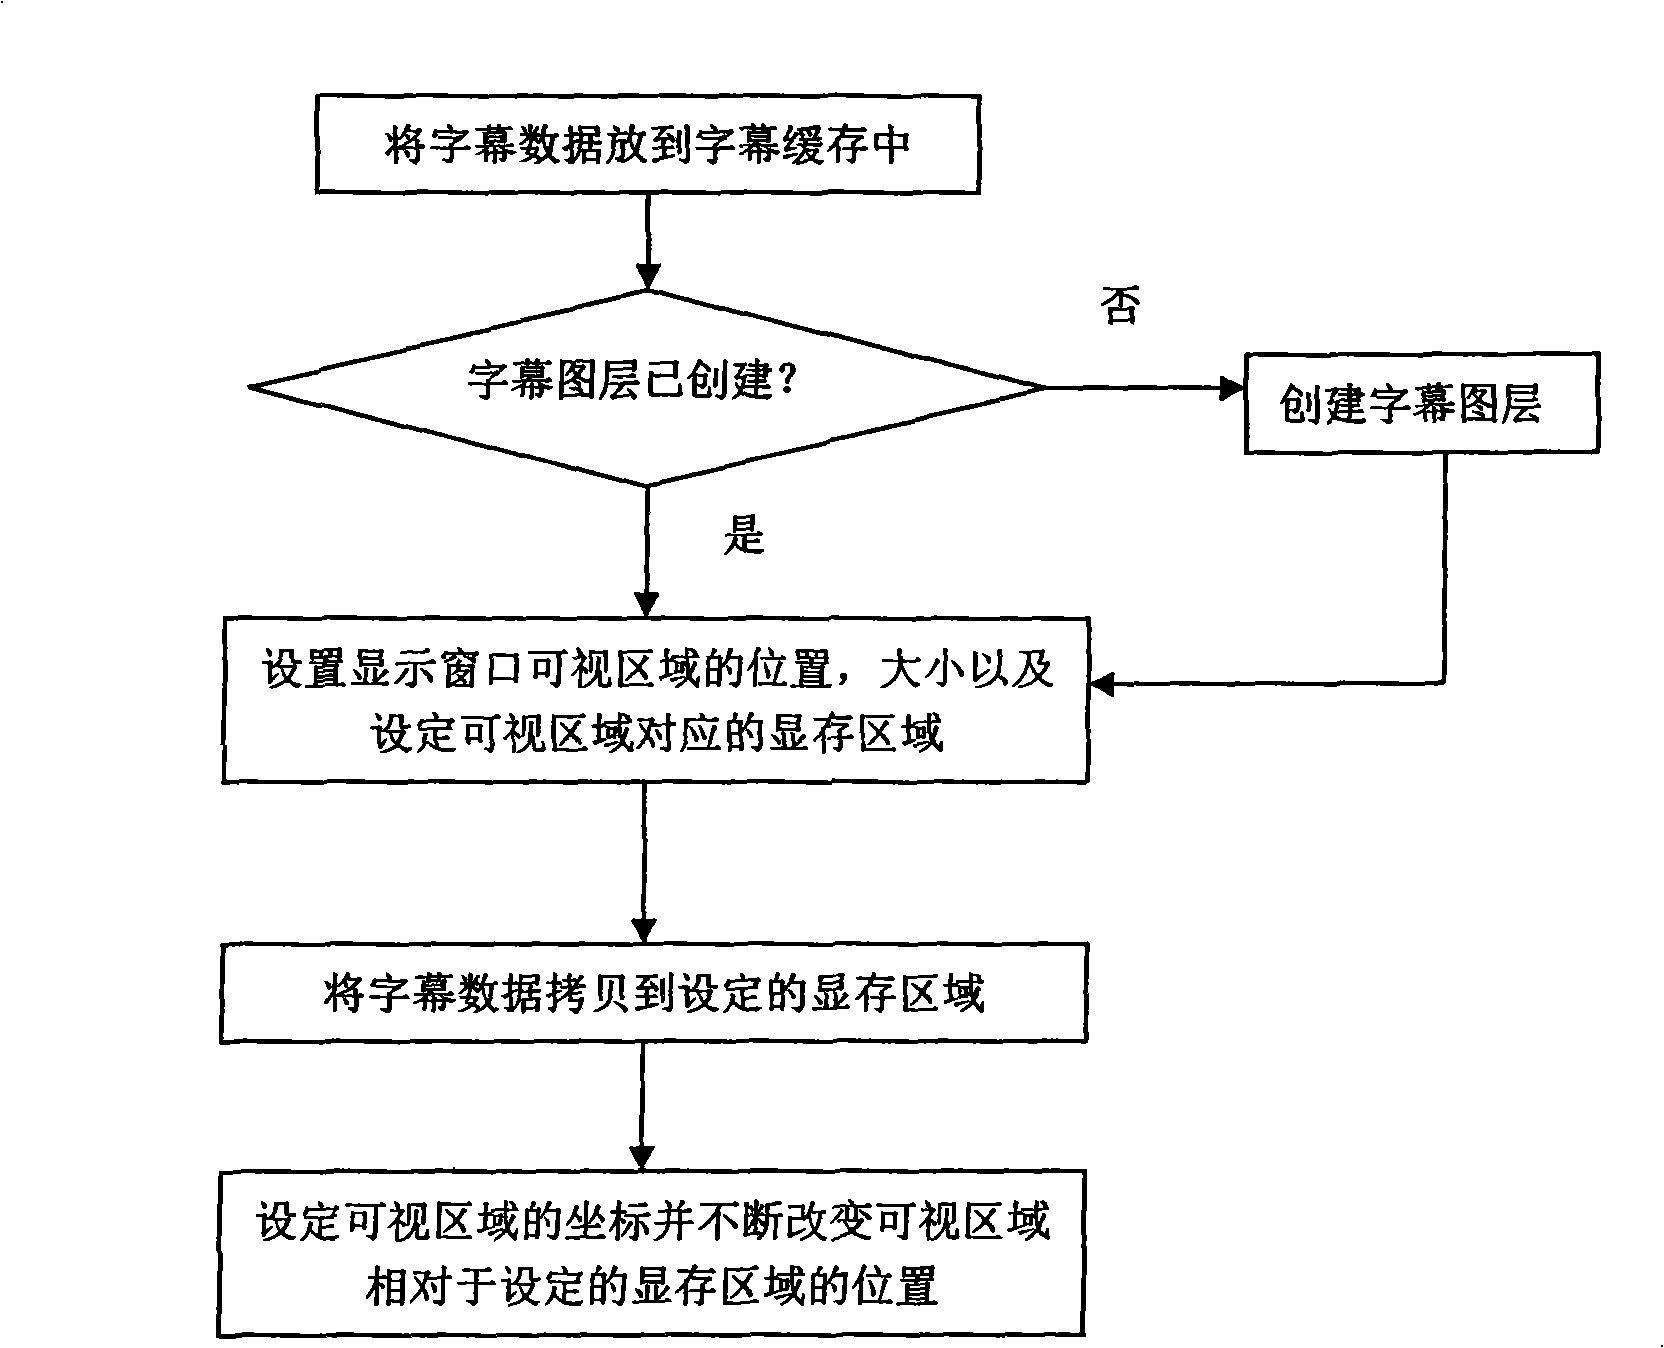 Method for displaying roll titles based on digital television set-top box